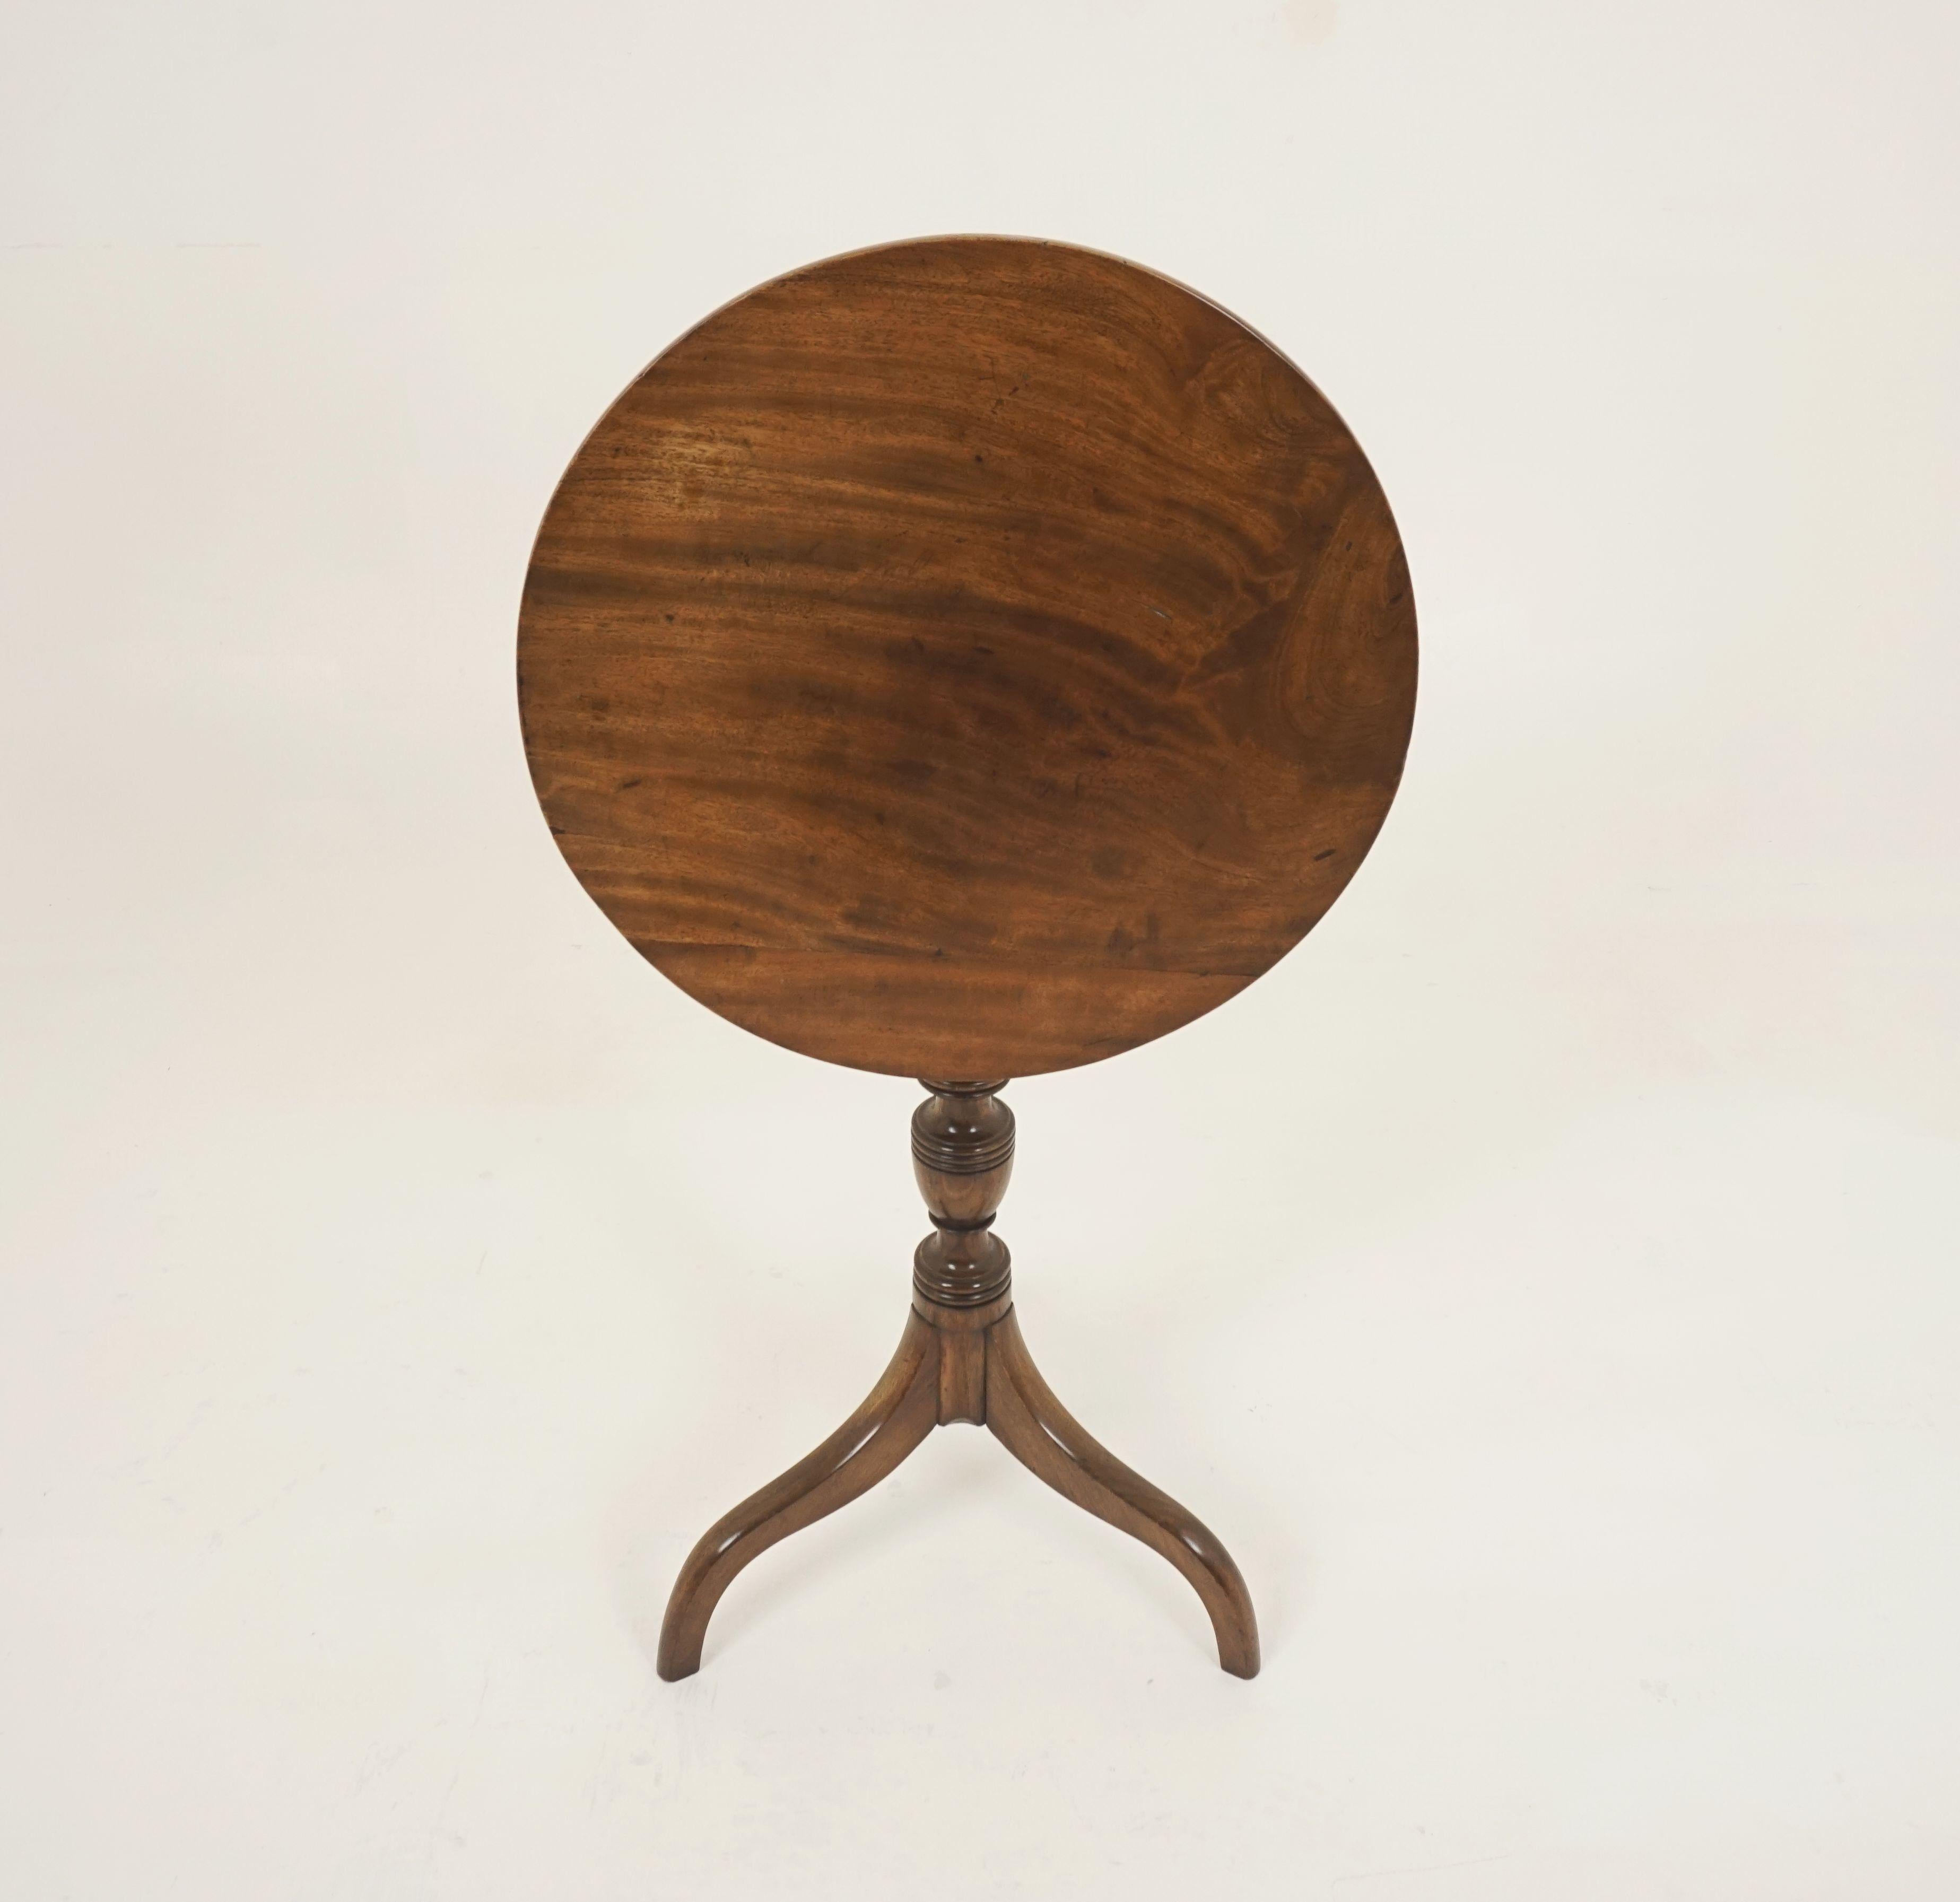 Hand-Crafted Antique Circular Walnut Table, Victorian Tilt Top Table, Scotland 1860